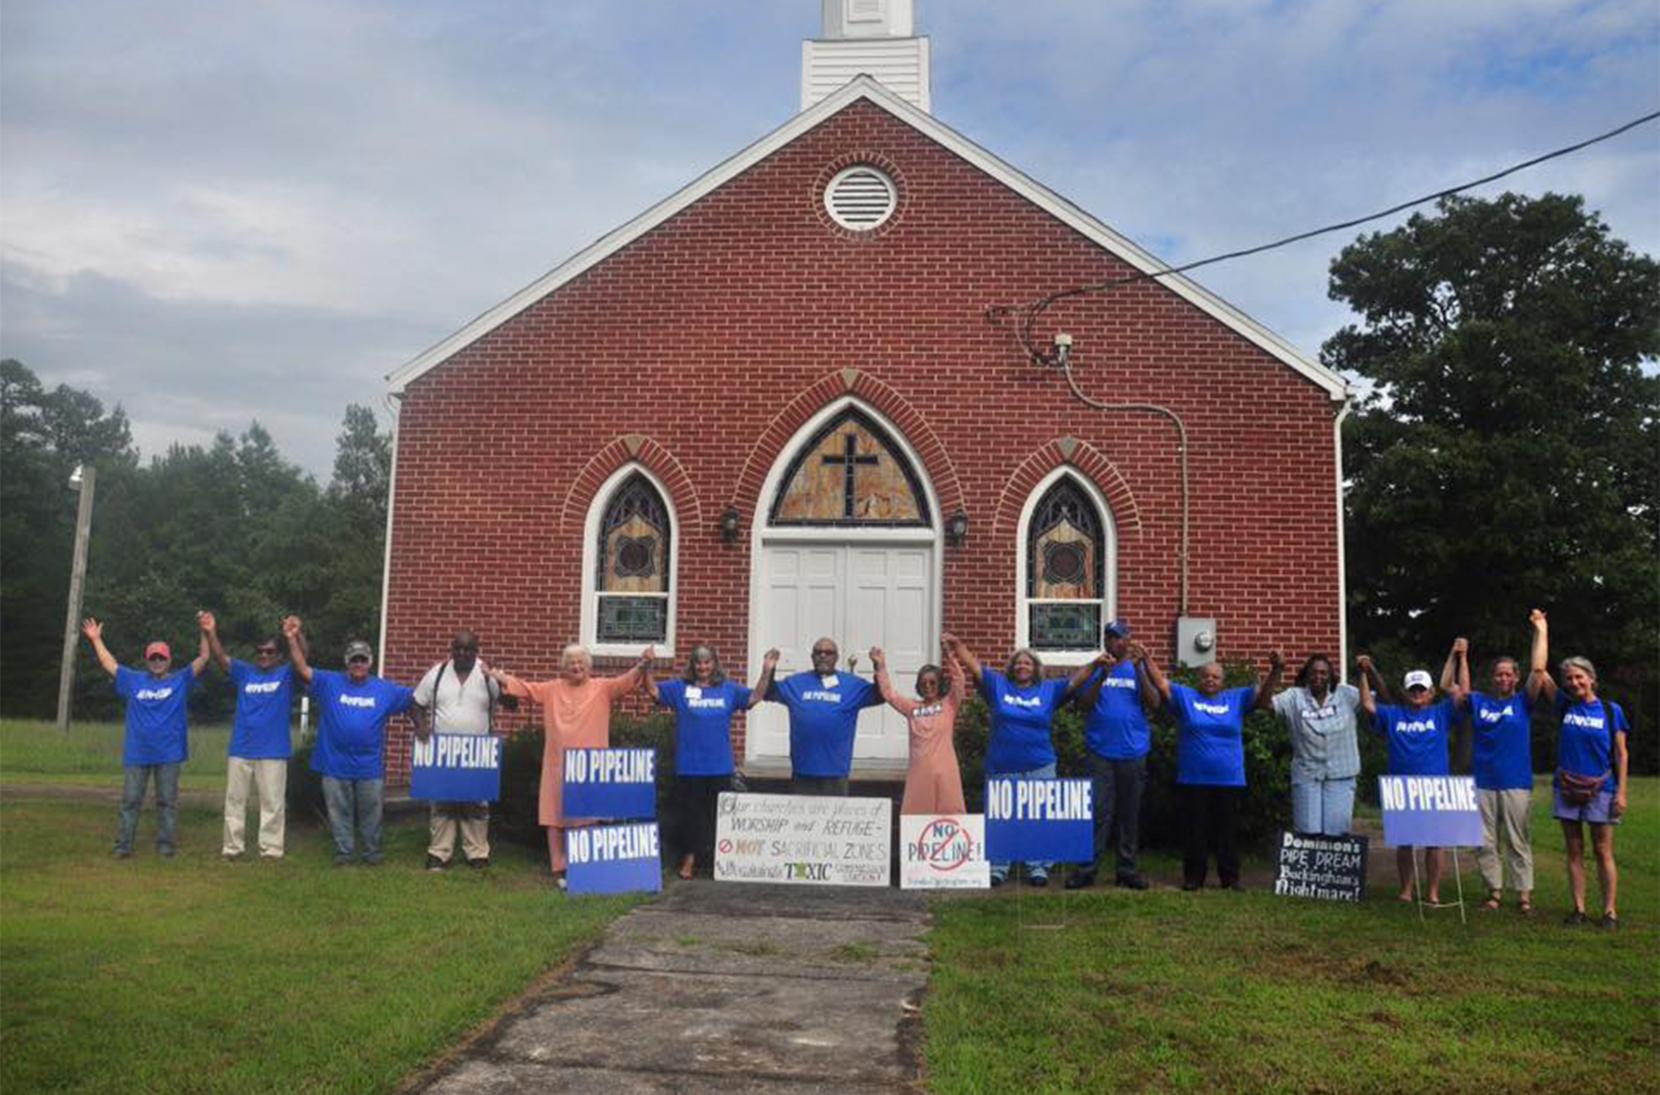 Fifteen community activists, mostly in matching No Pipeline T-shirts, joyfully hold hands in front of a small brick church in celebration of the cancellation of the Atlantic Coast Pipeline. Several anti-pipeline protest signs lean up against them.